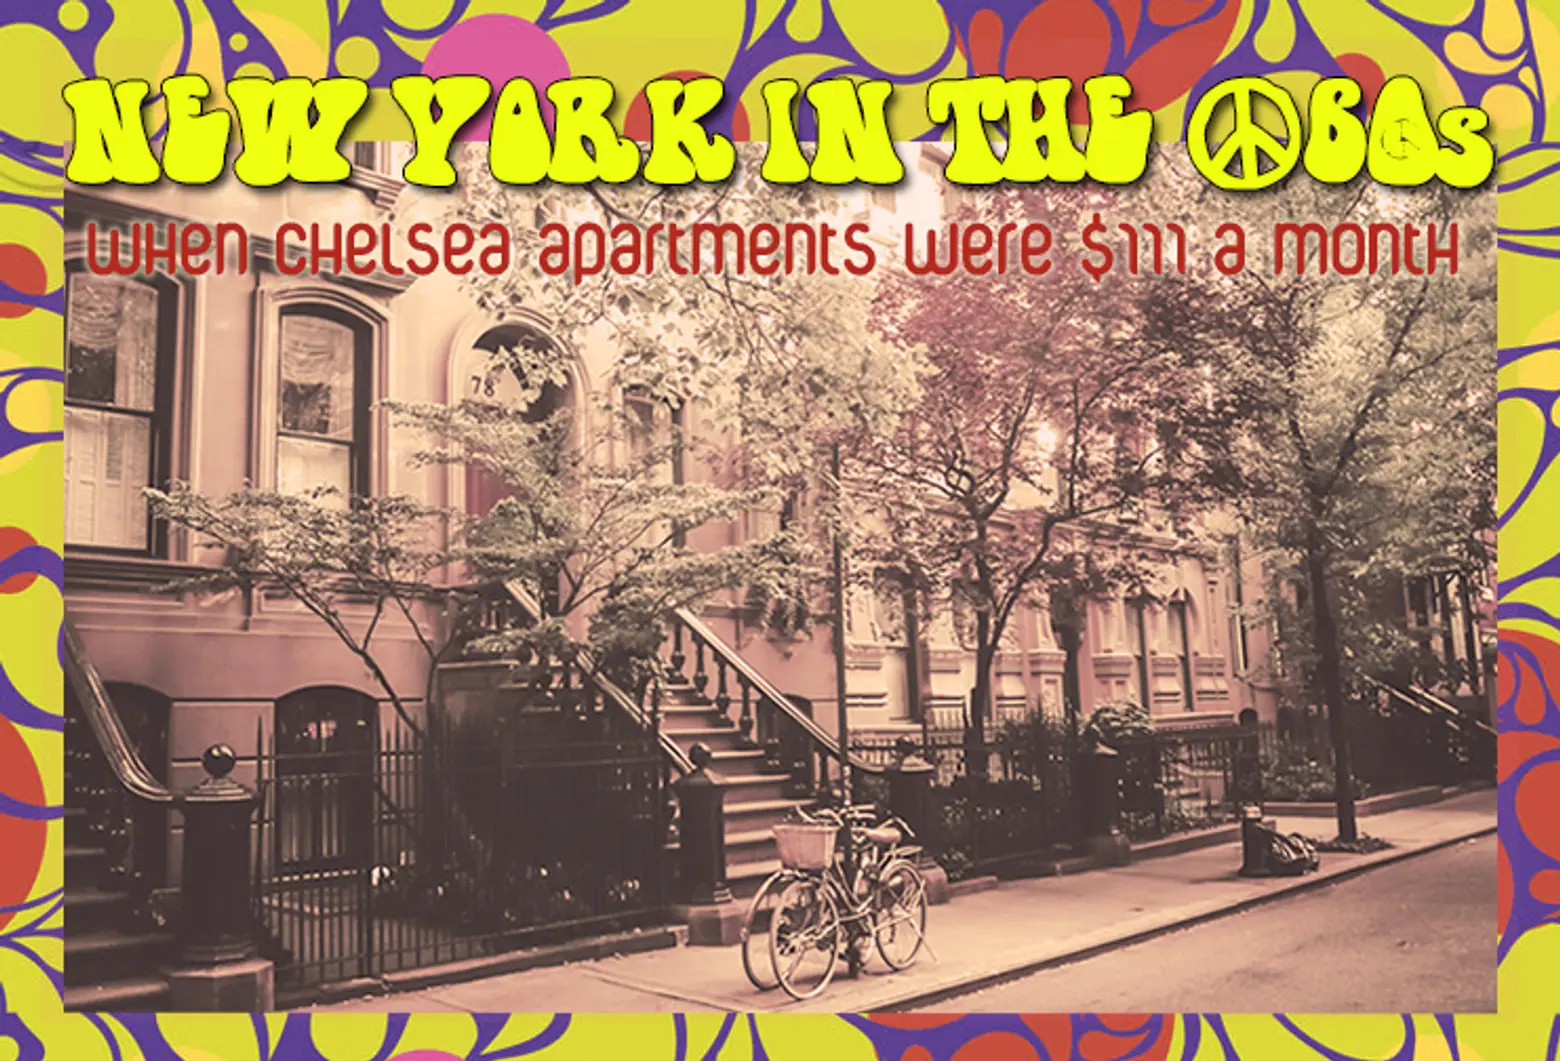 New York in the '60s: When Chelsea Apartments Were $111 a Month